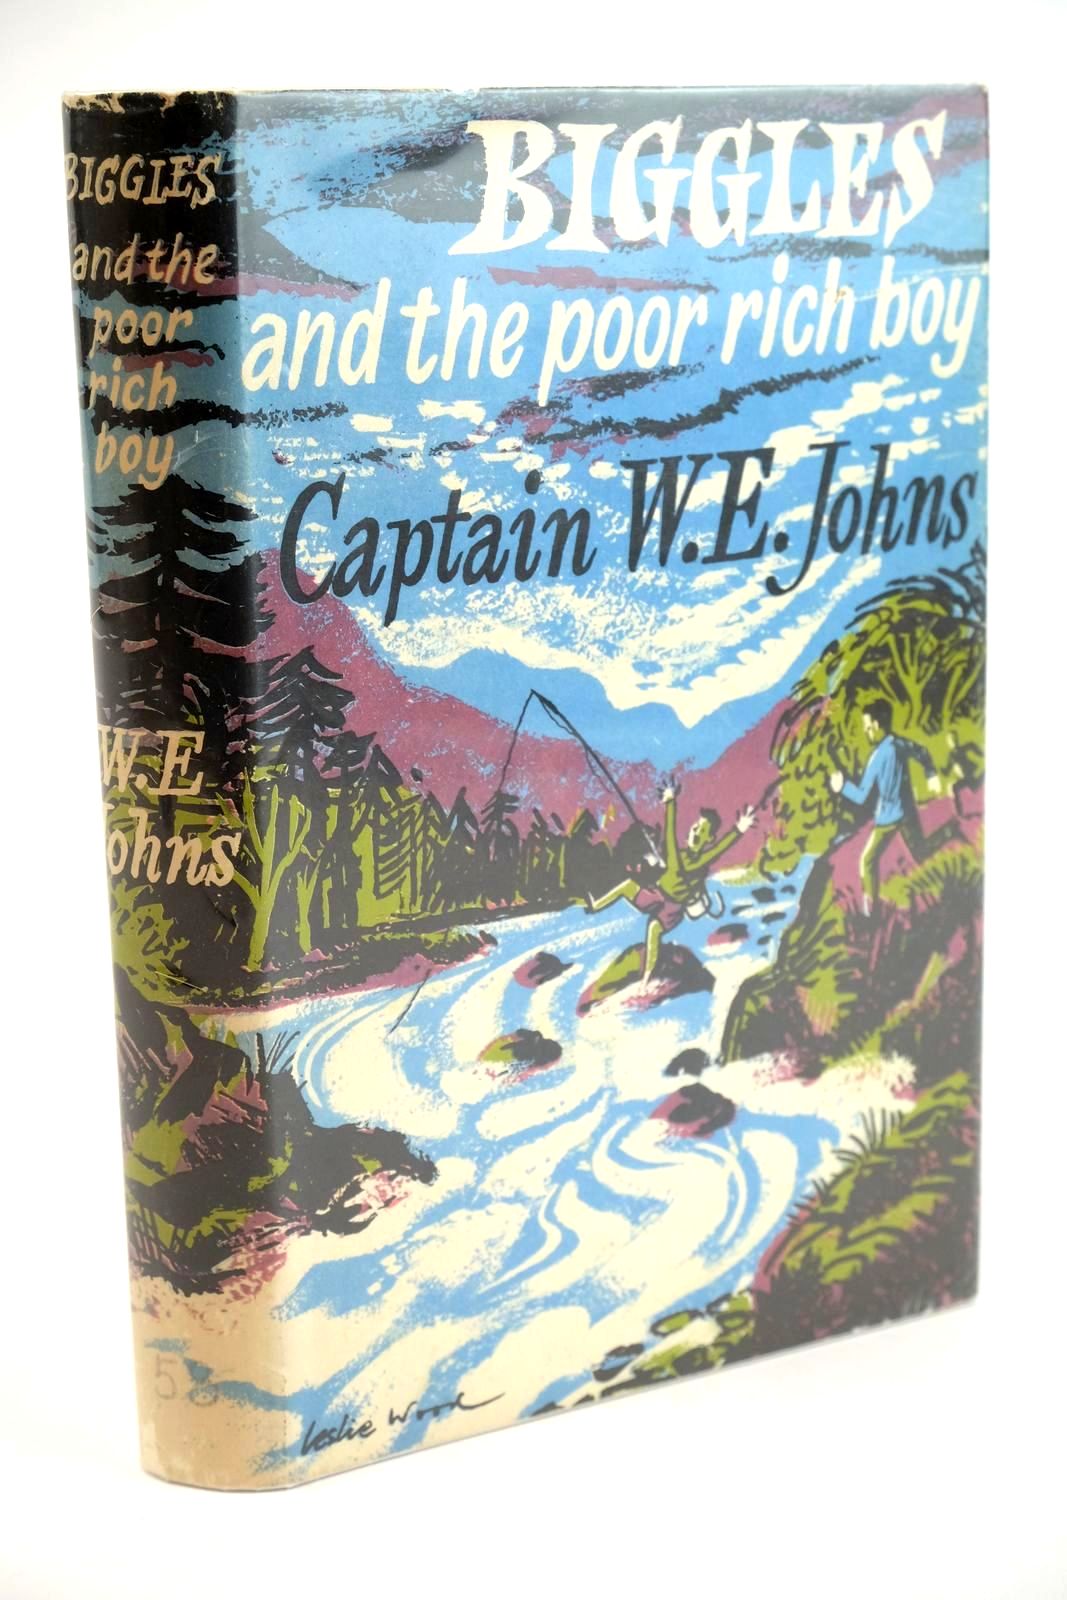 Photo of BIGGLES AND THE POOR RICH BOY written by Johns, W.E. illustrated by Stead, Leslie published by The Children's Book Club (STOCK CODE: 1323401)  for sale by Stella & Rose's Books